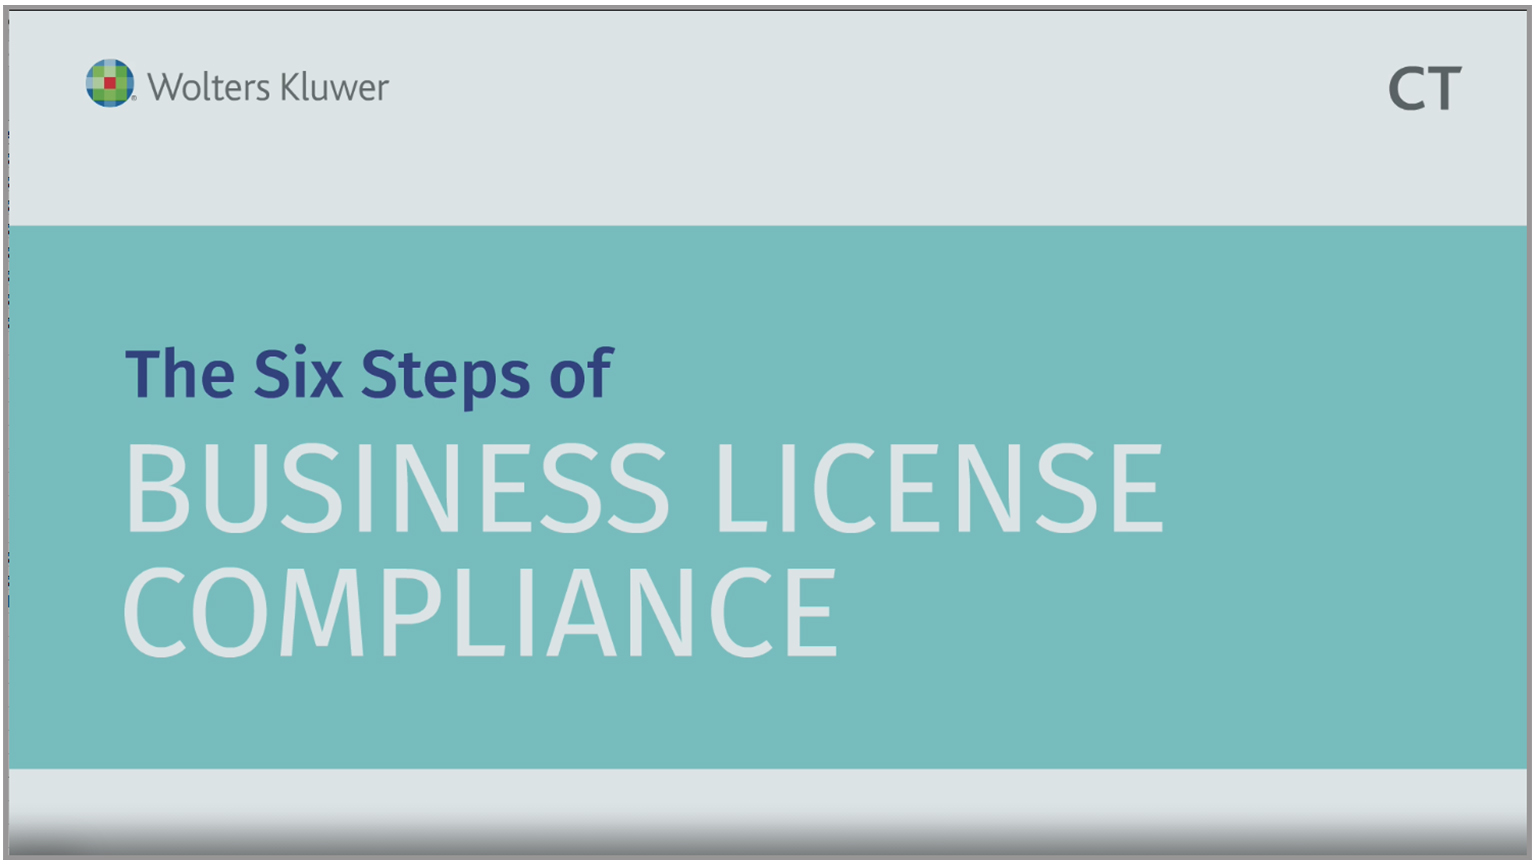 The Six Steps of Business License Compliance